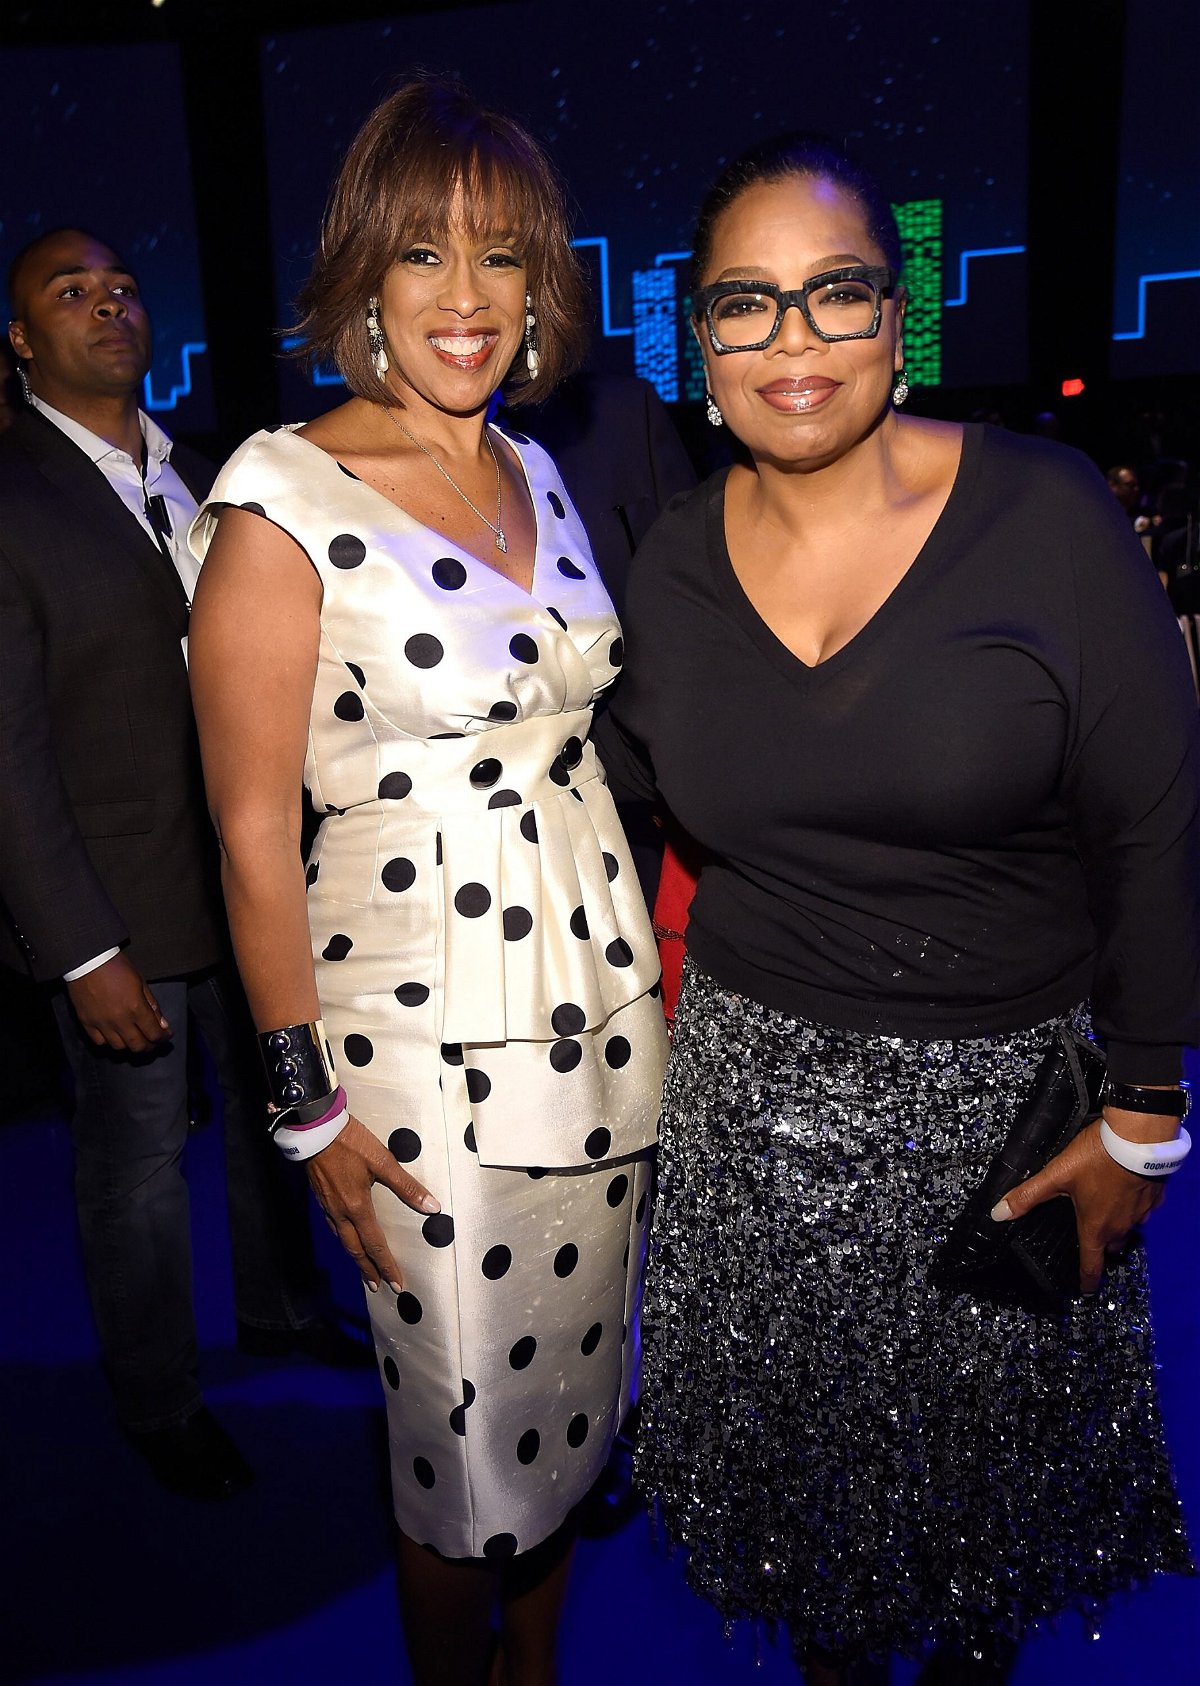 <i>Kevin Mazur/Getty Images</i><br/>Gayle King and Oprah Winfrey are sharing insight about their long friendship.